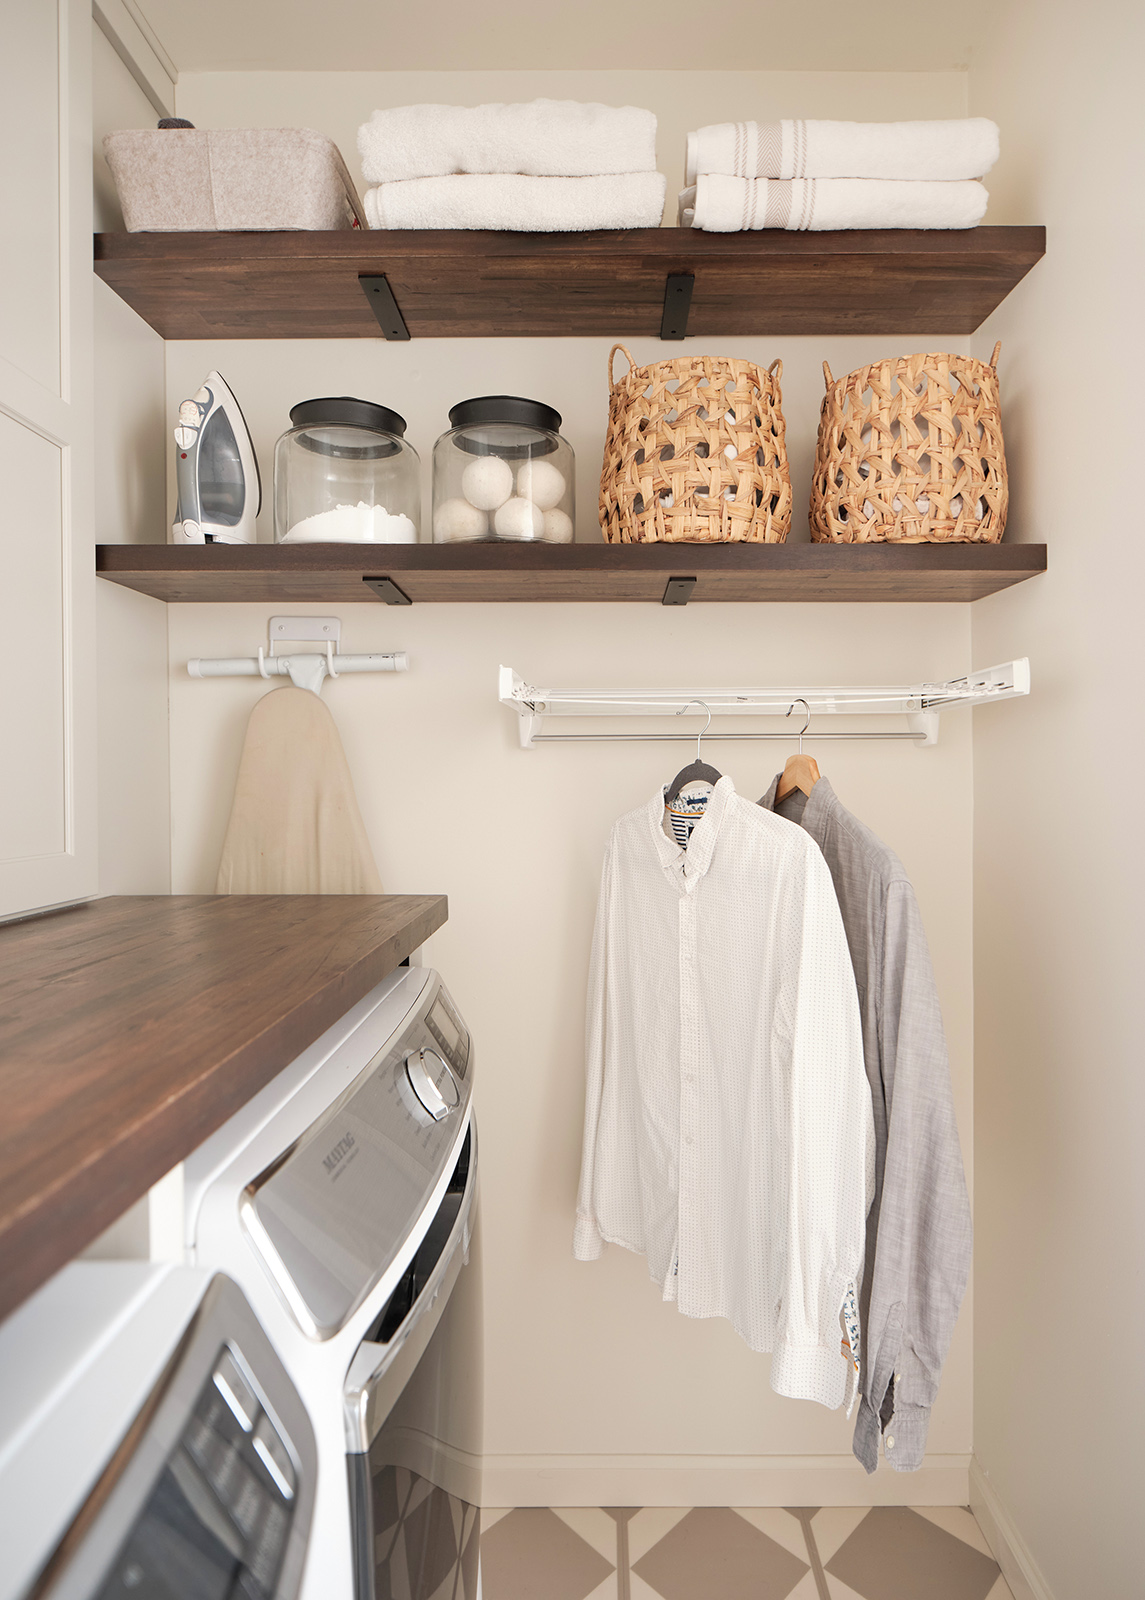 retractable drying rack - laundry room storage solutions